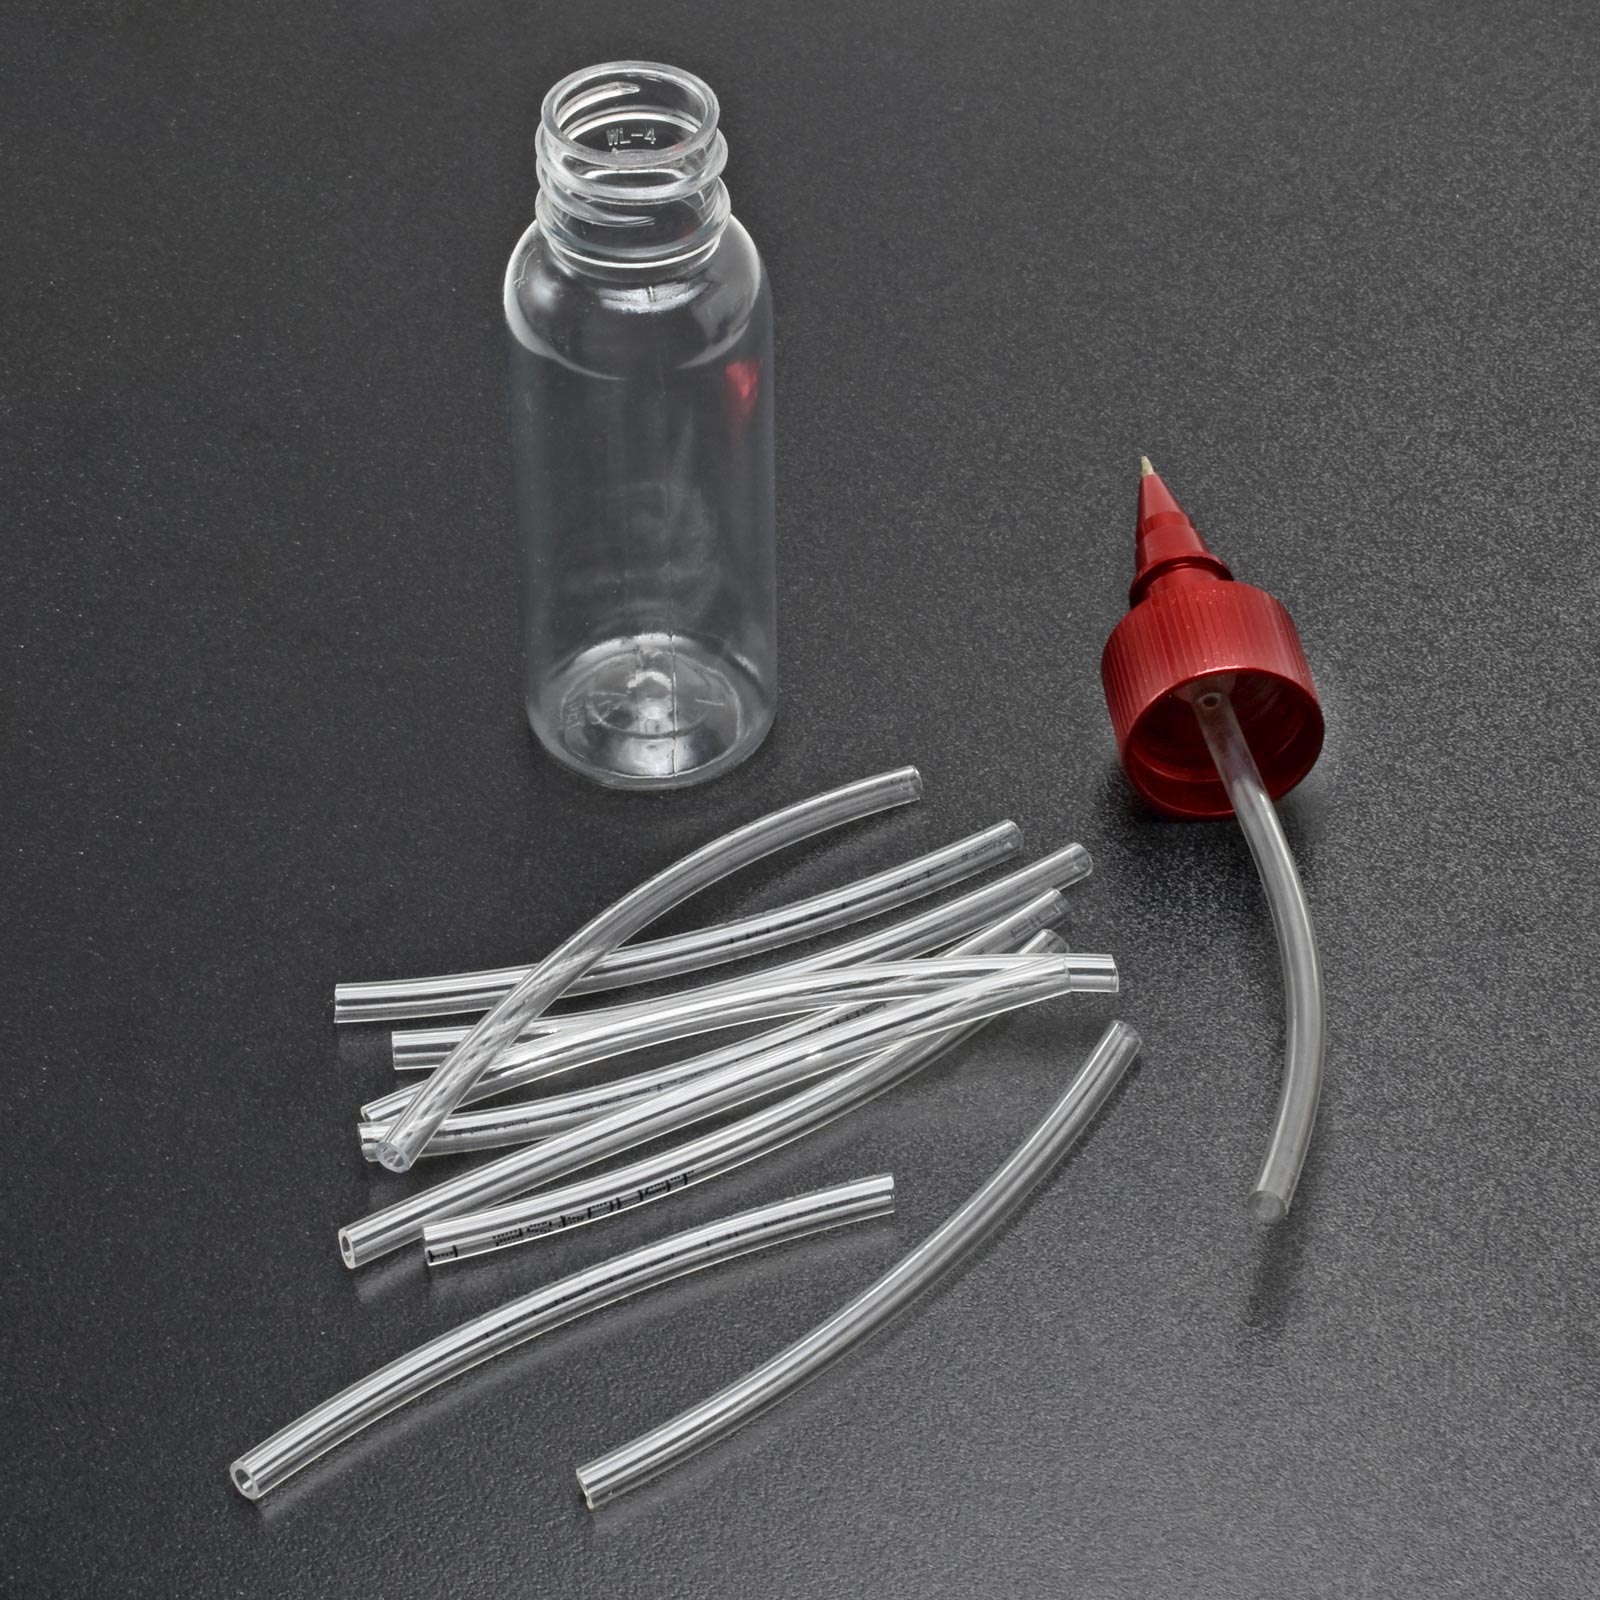 Replacement Siphon Tubes for use with item #91060 Micro - Mark External Mix, Siphon Feed Airbrush Set